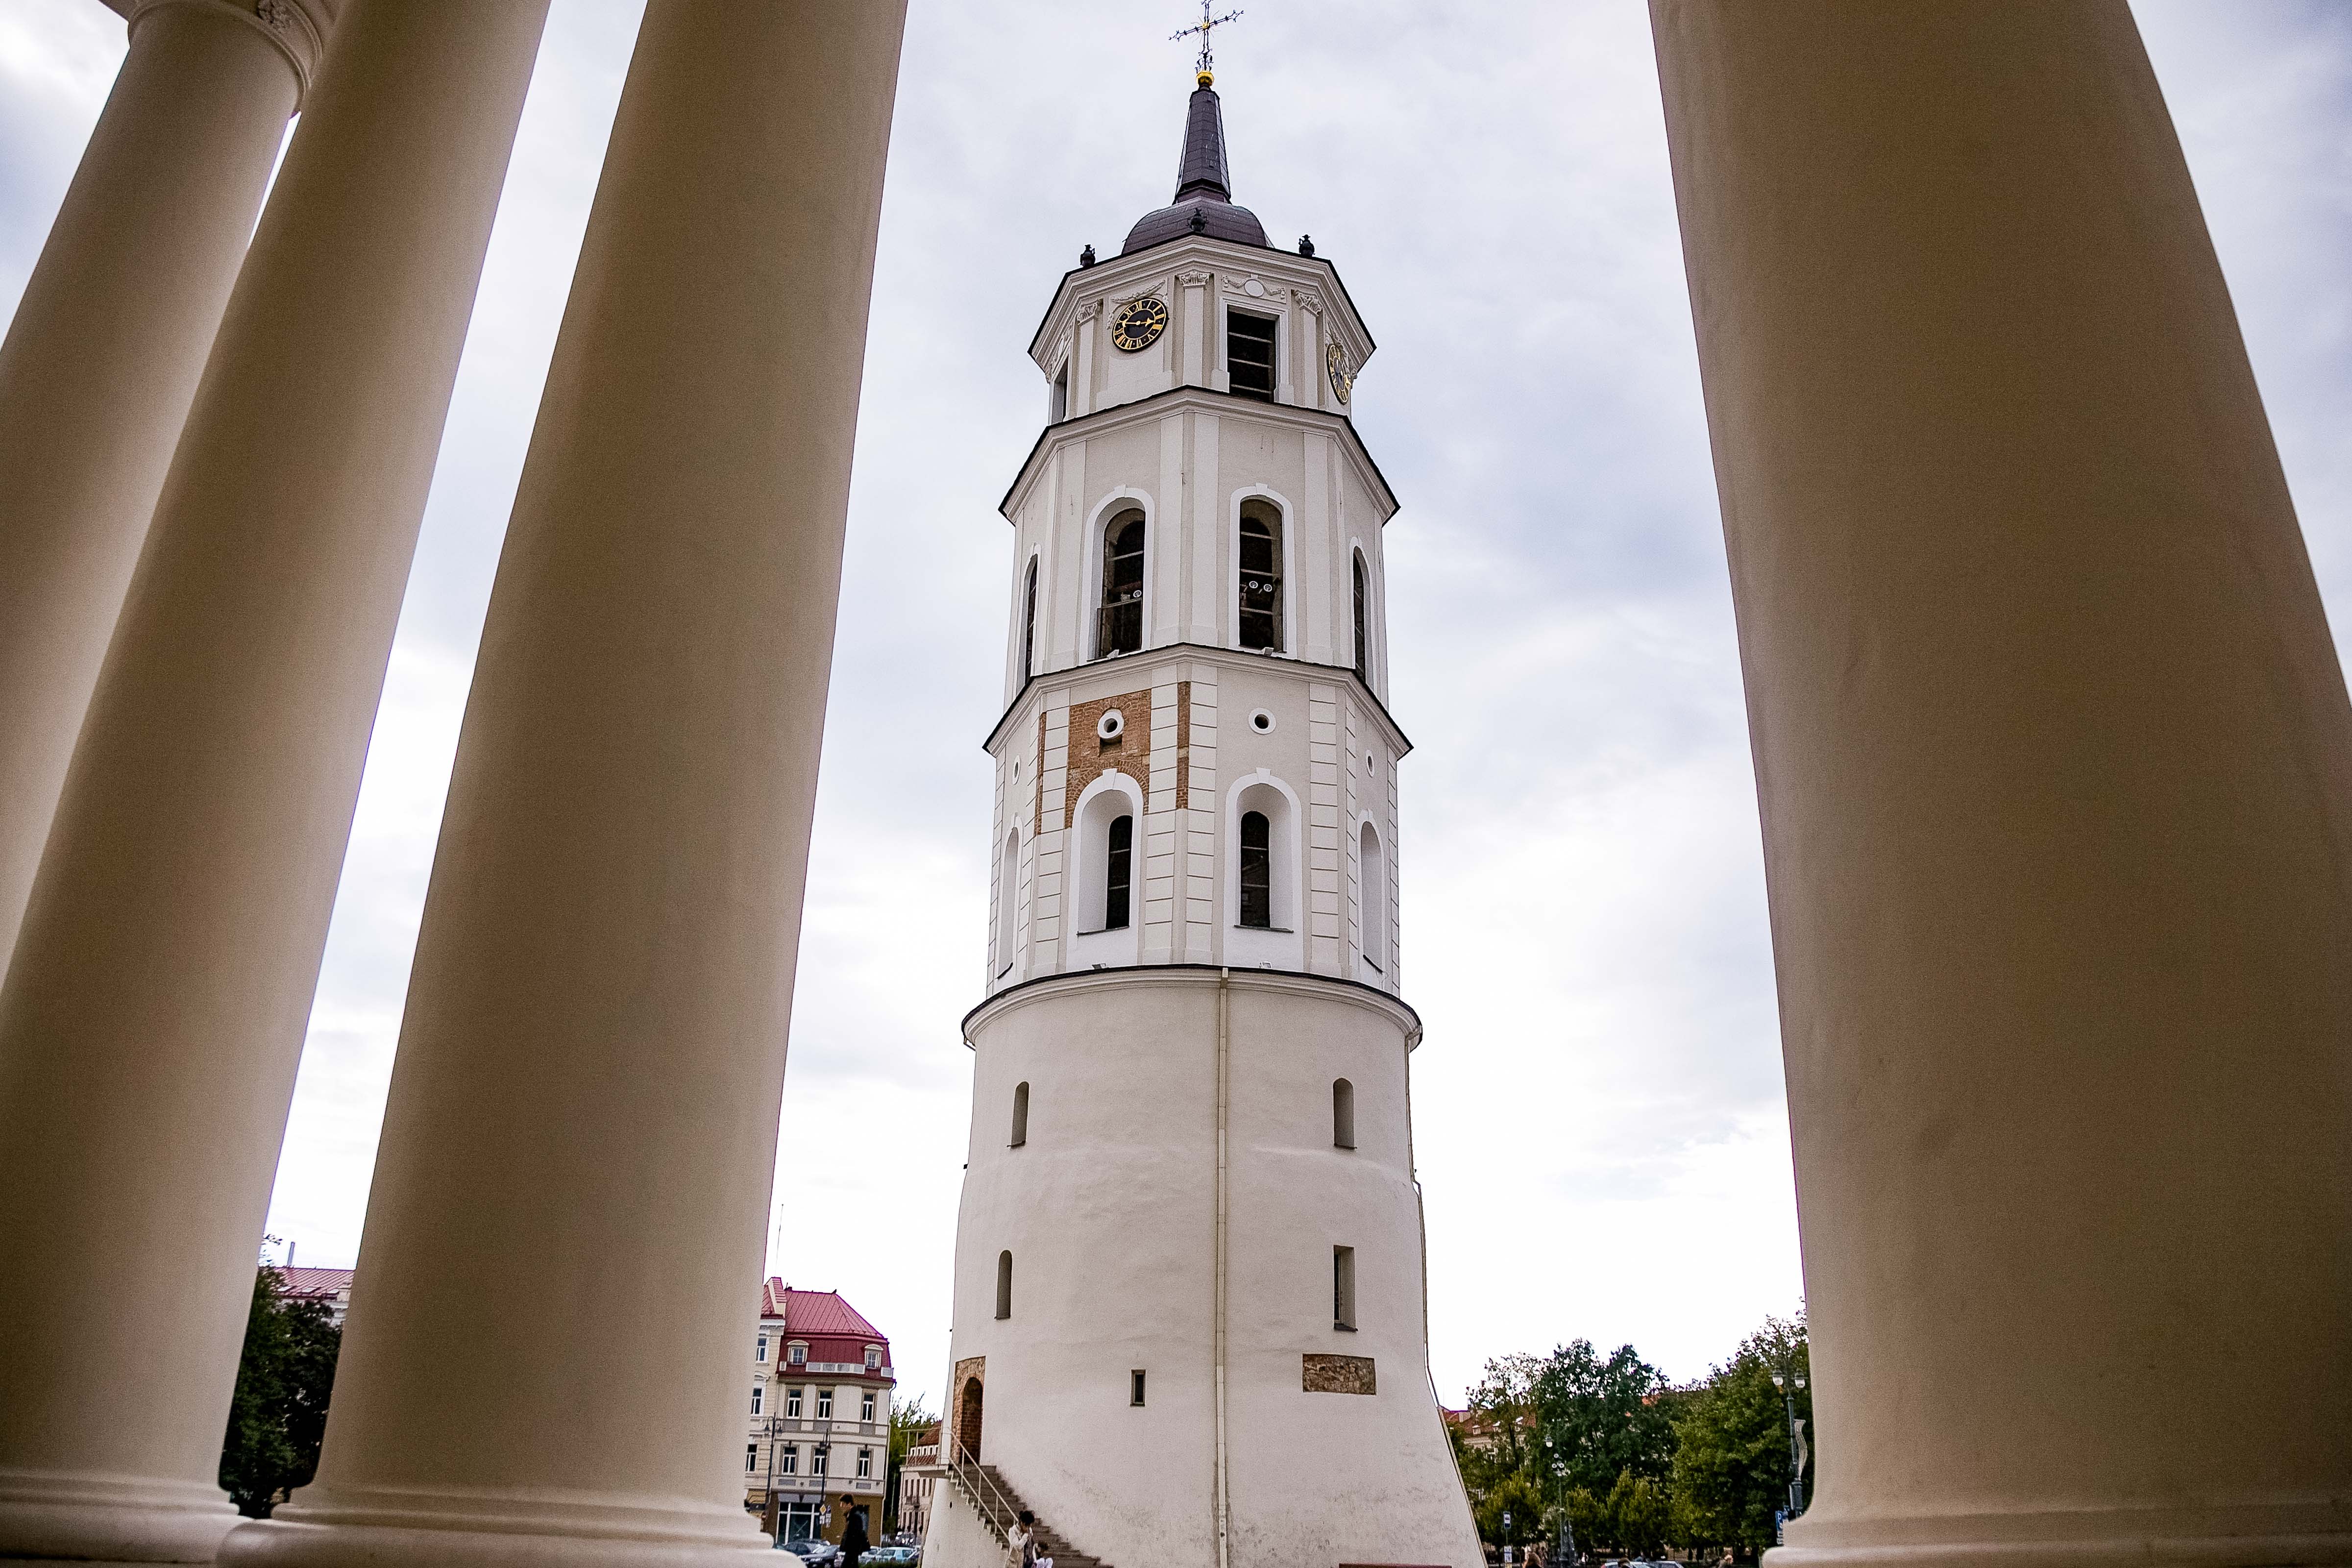 Lithuania, Vilnius, Cathedral Pillars And Tower, 2010, IMG_3092